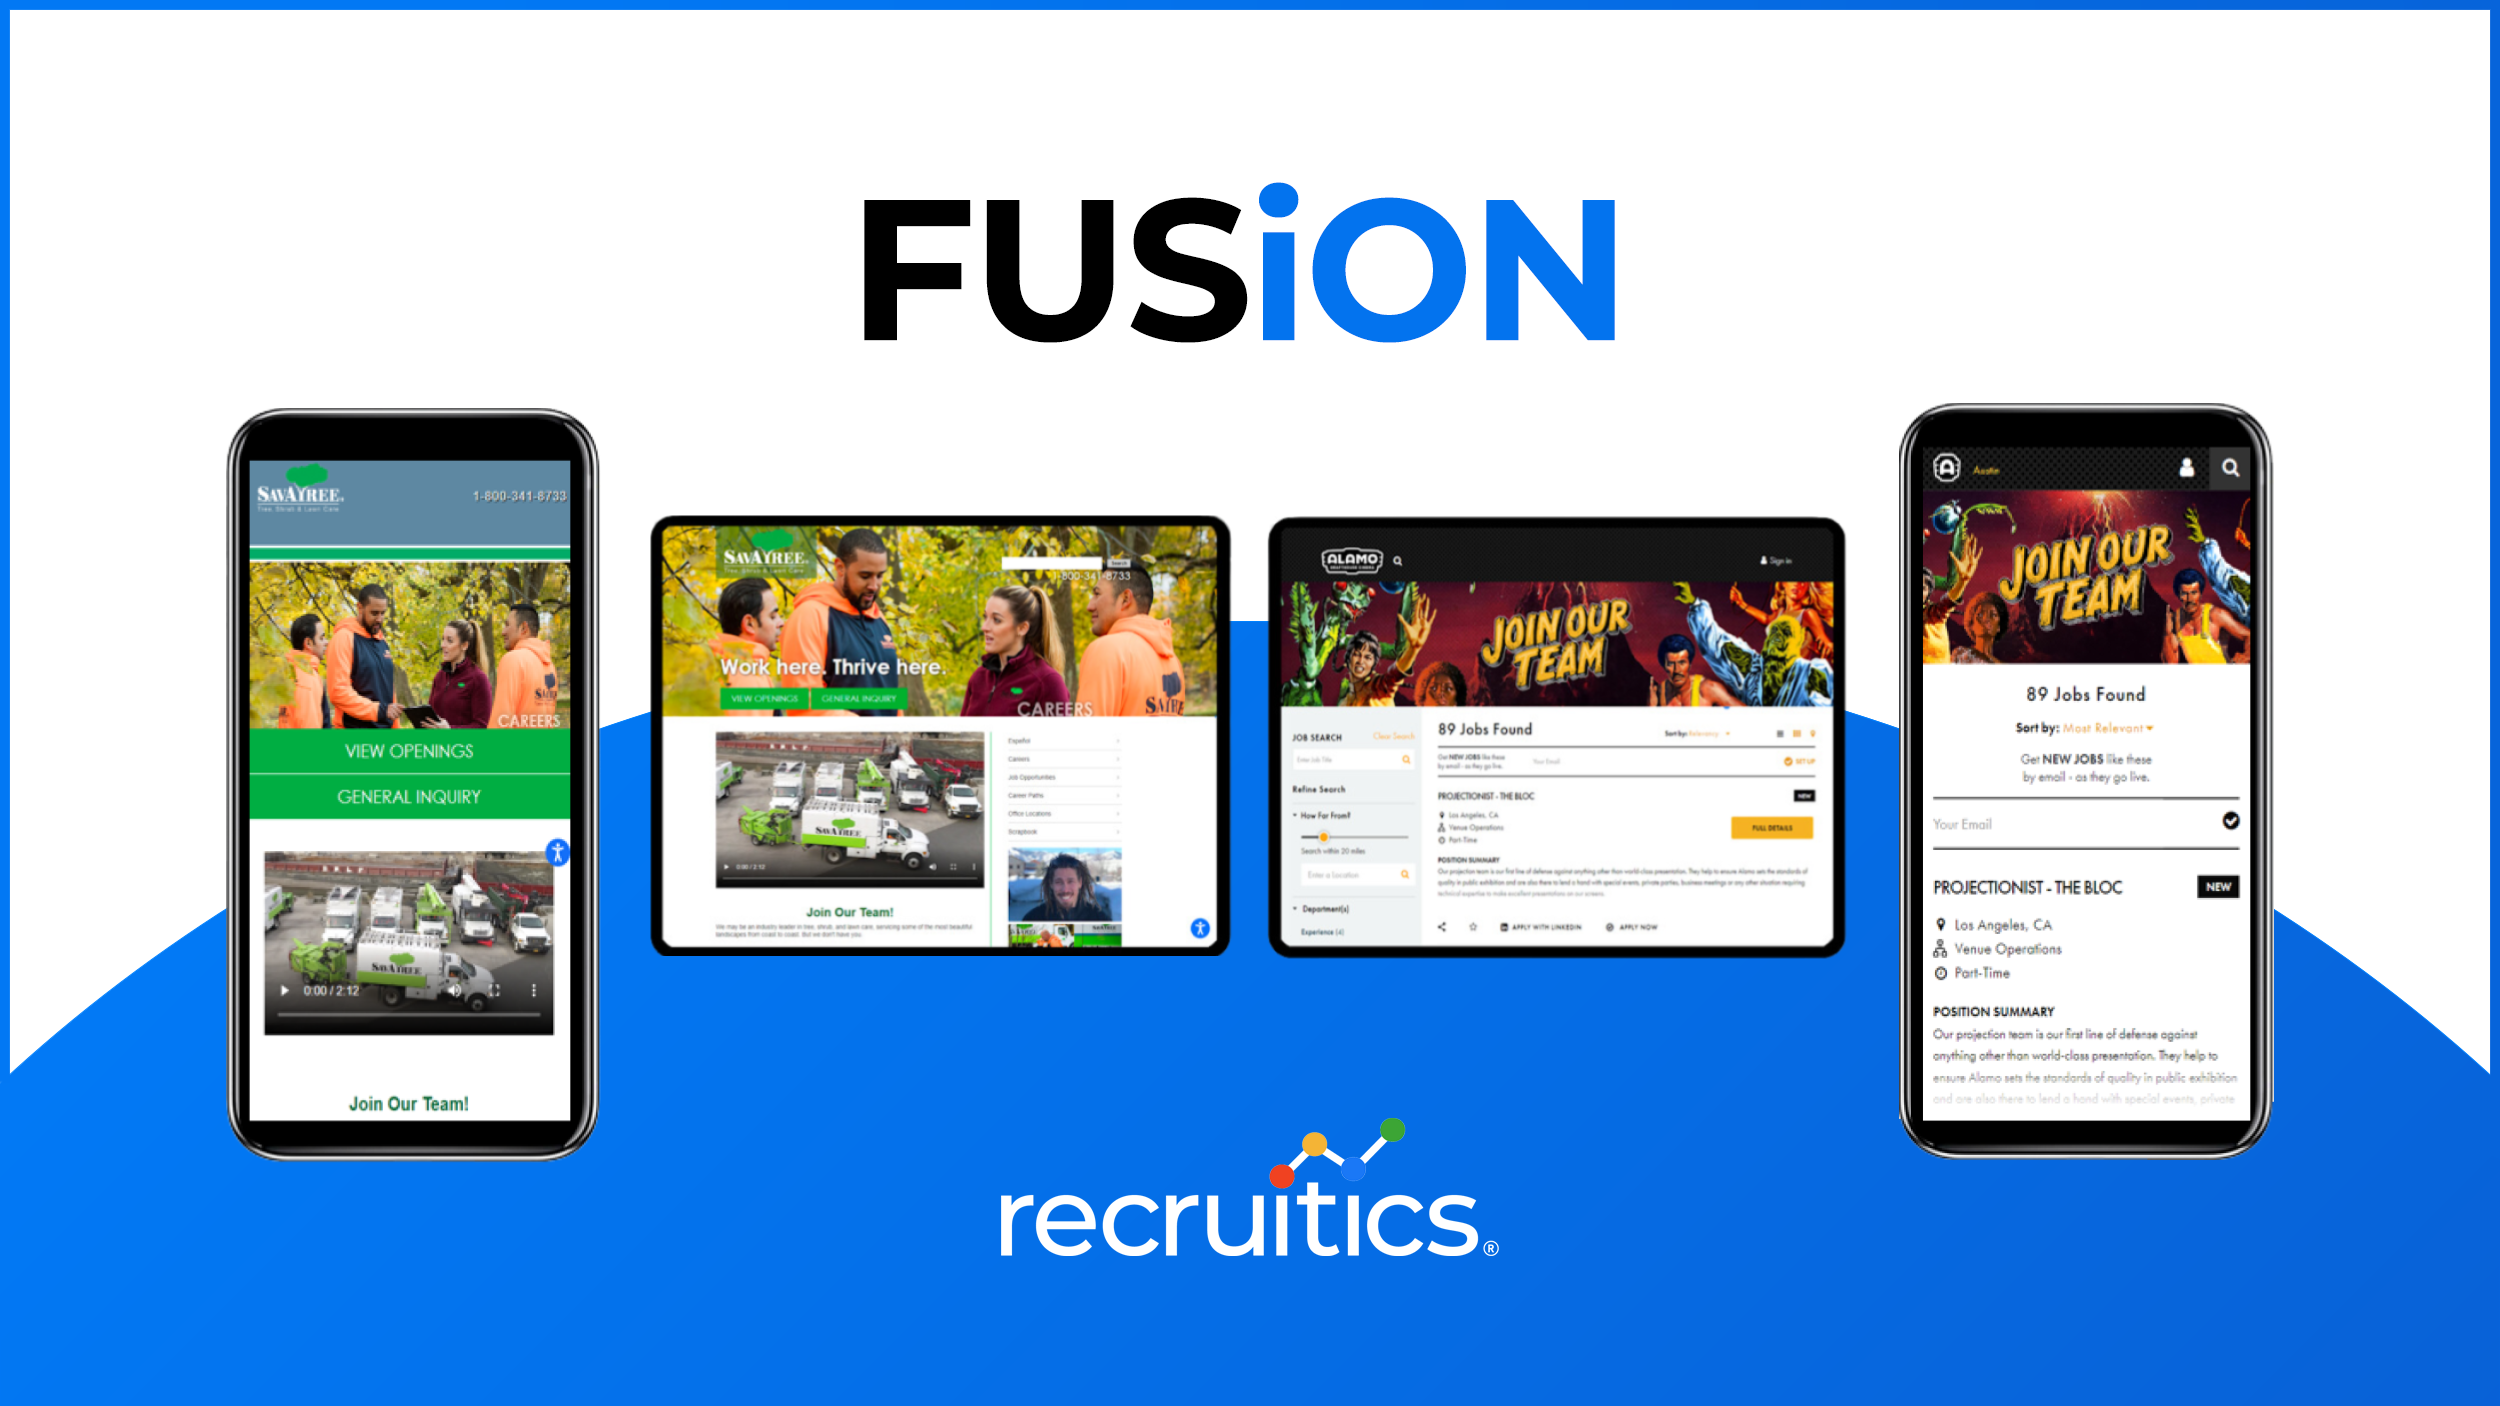 Recruitics Launches Fusion, the New Quality Applicant Delivery Platform